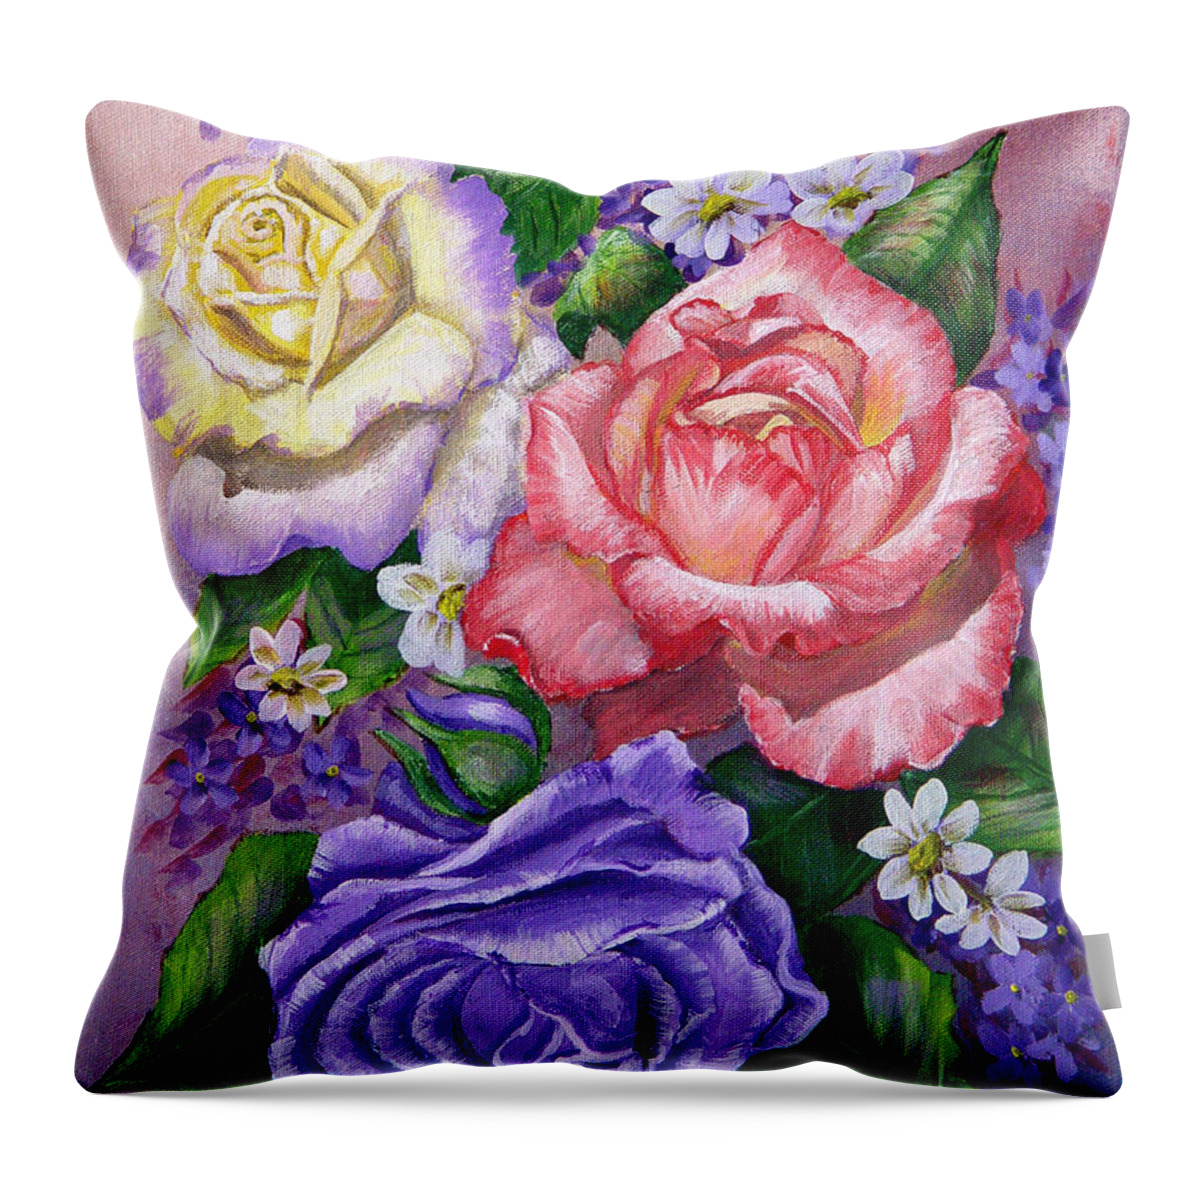 Rose Throw Pillow featuring the painting Roses by Quwatha Valentine